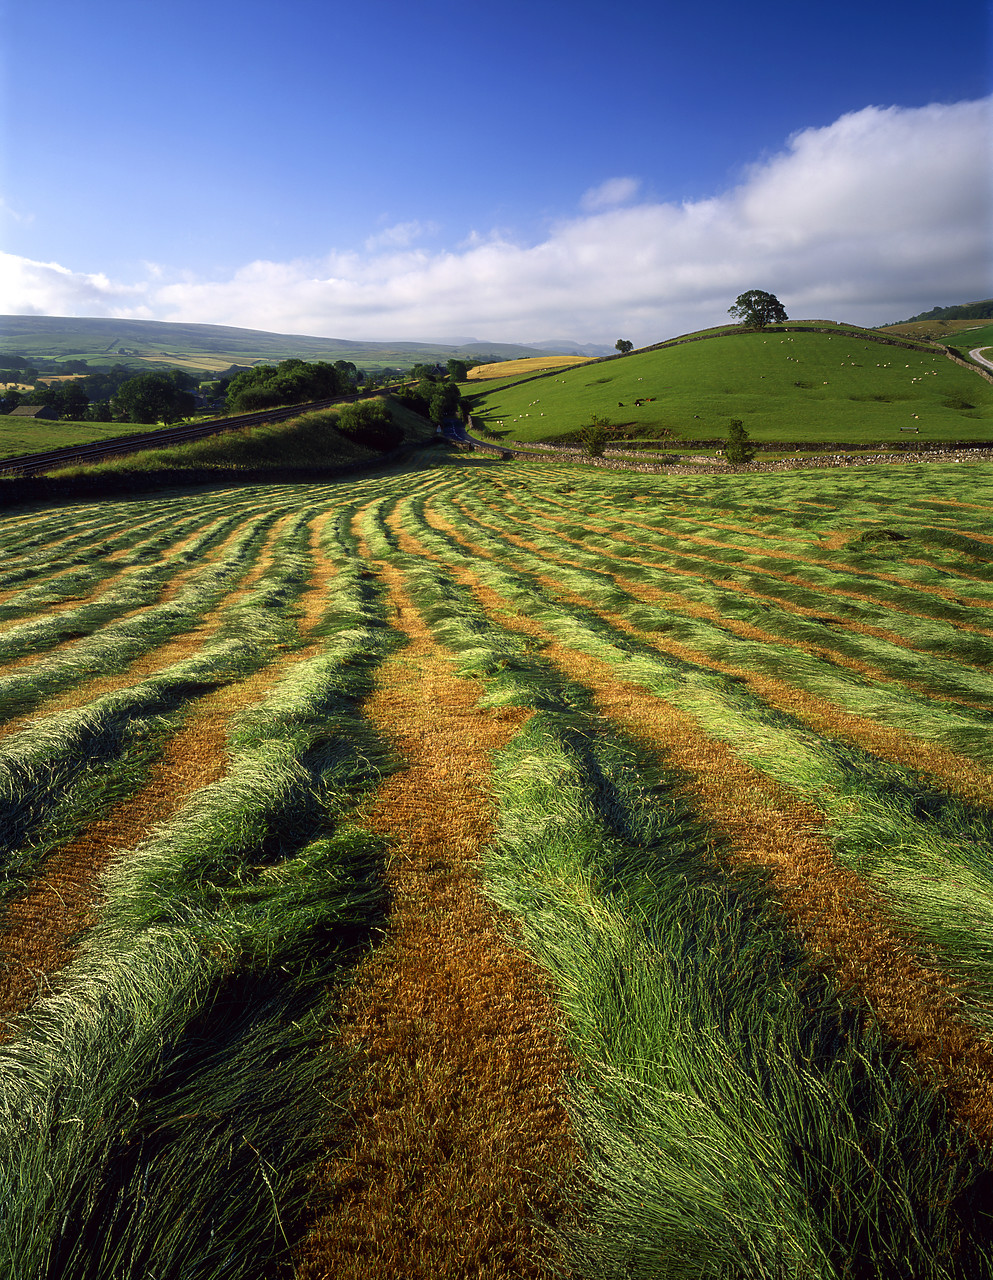 #060779-2 - Rows of Freshly Cut Grass, near Horton in Ribblesdale, North Yorkshire, England